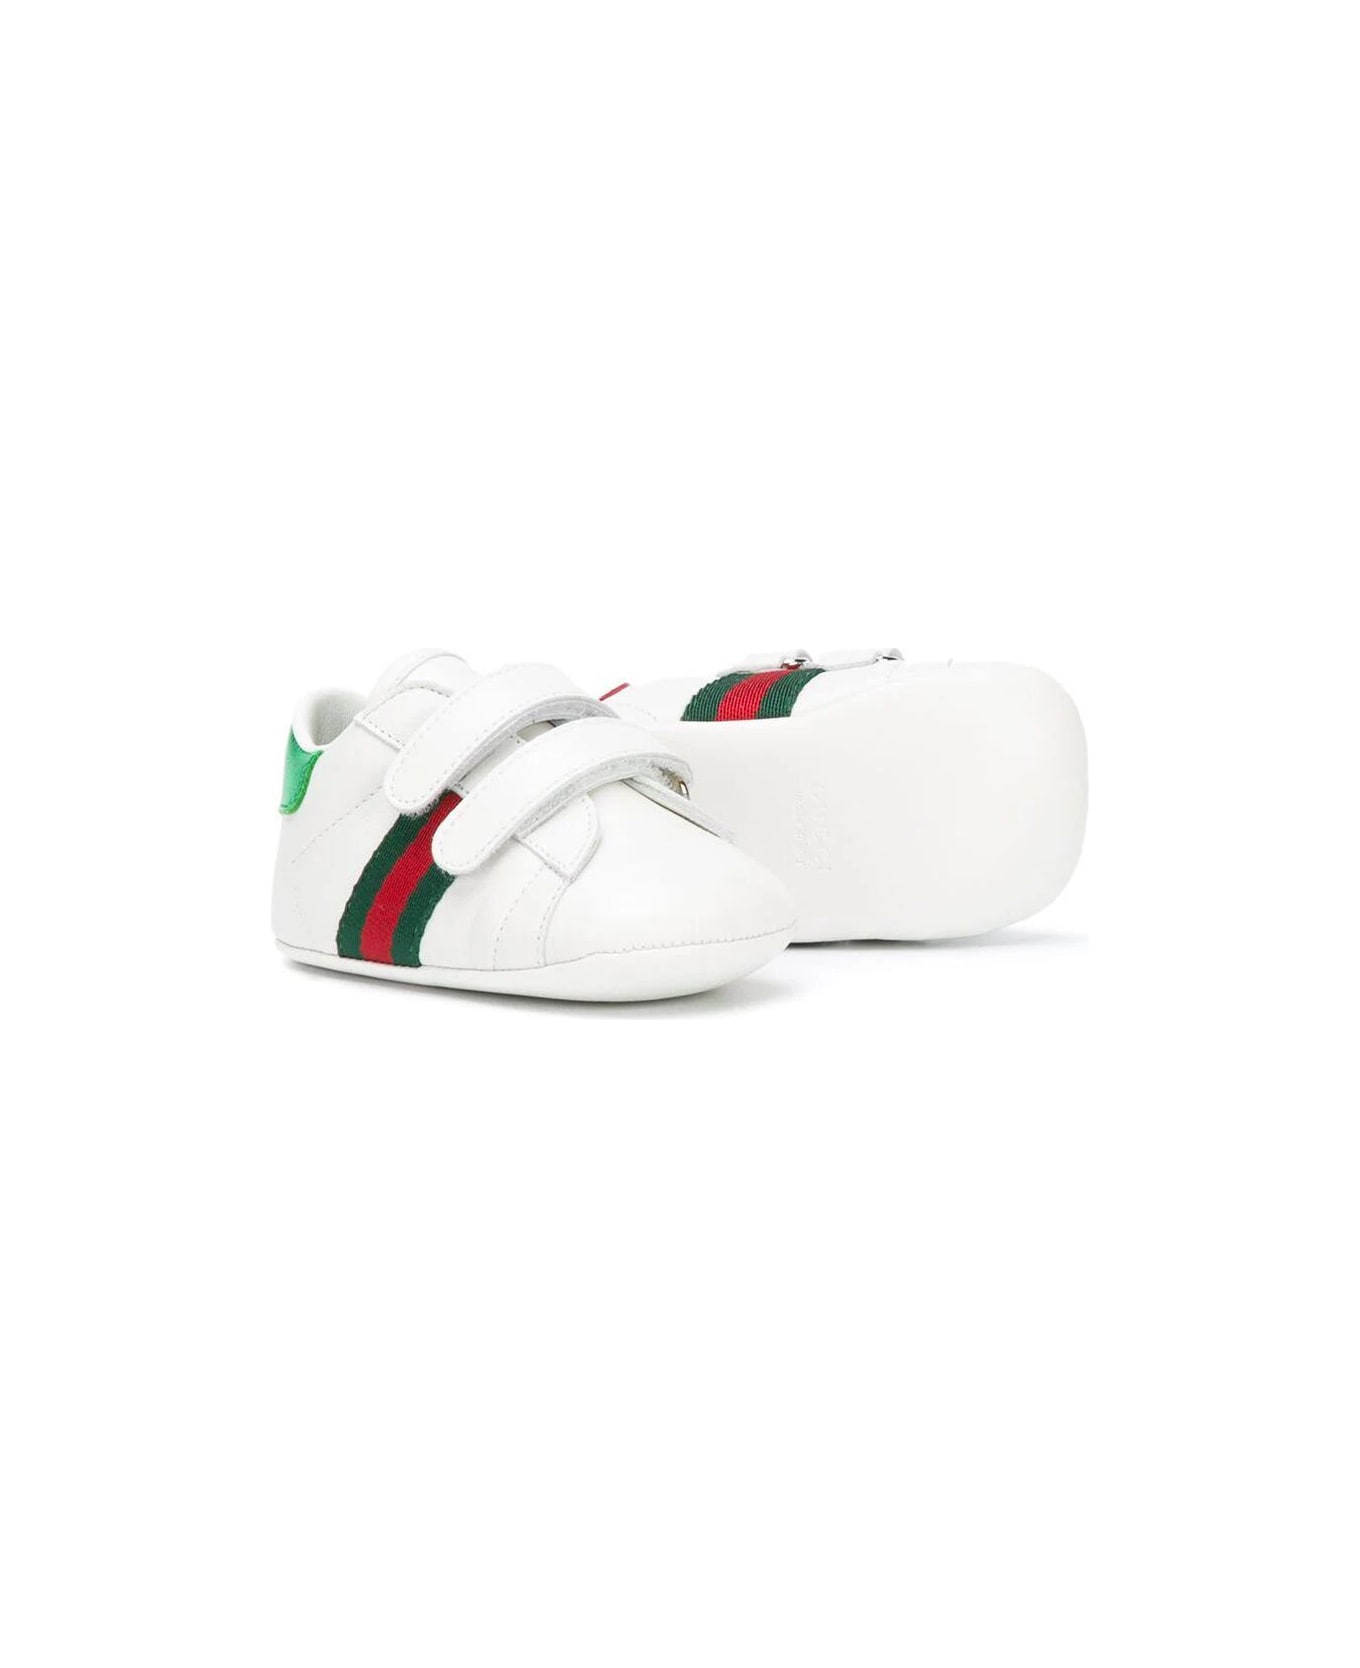 Gucci Sneaker Leather - black hiking sandals are a great choice